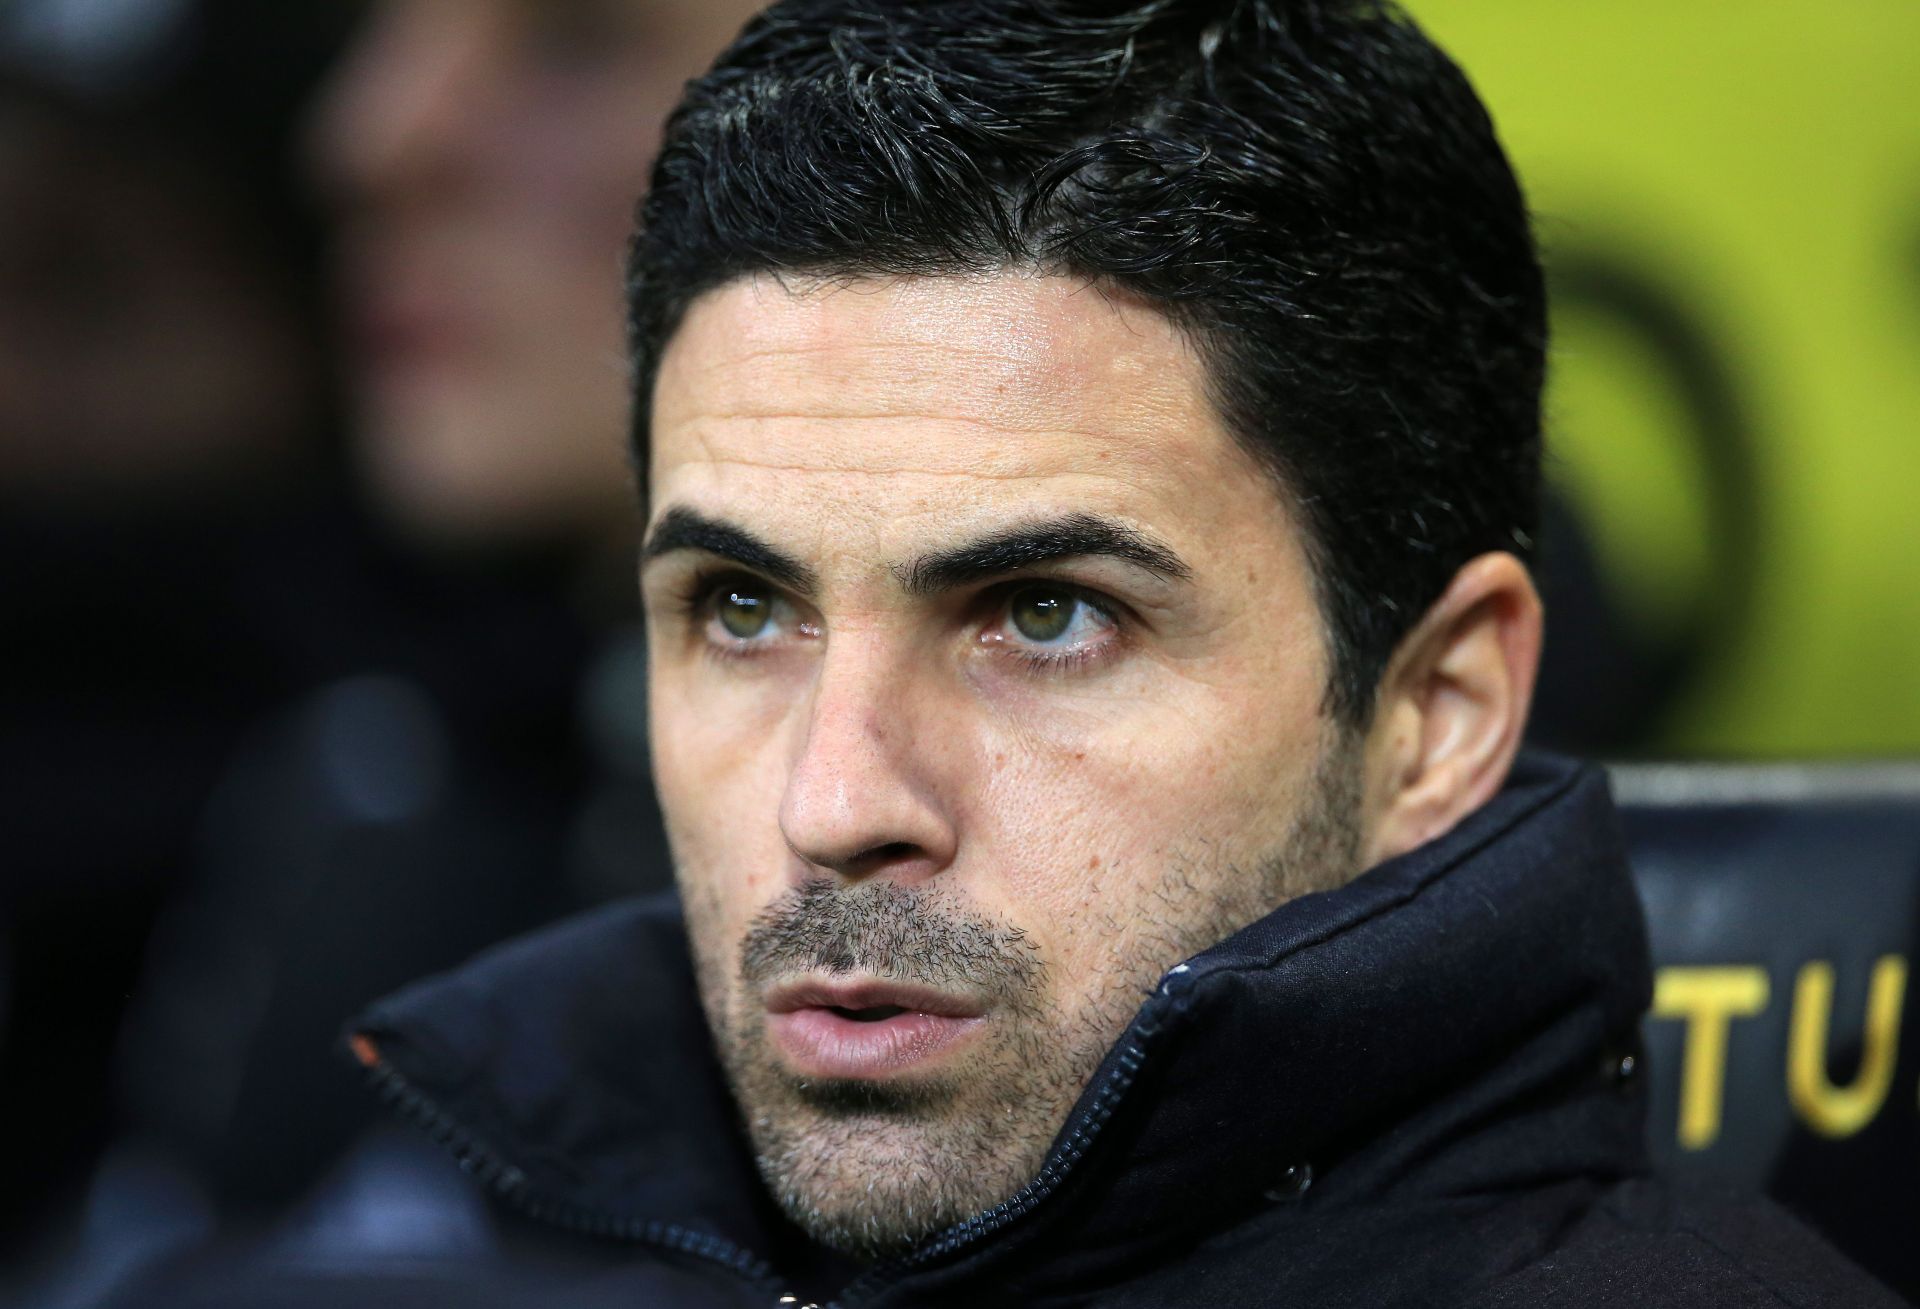 Arsenal manager Mikel Arteta masterminded a win over Wolves on Thursday.